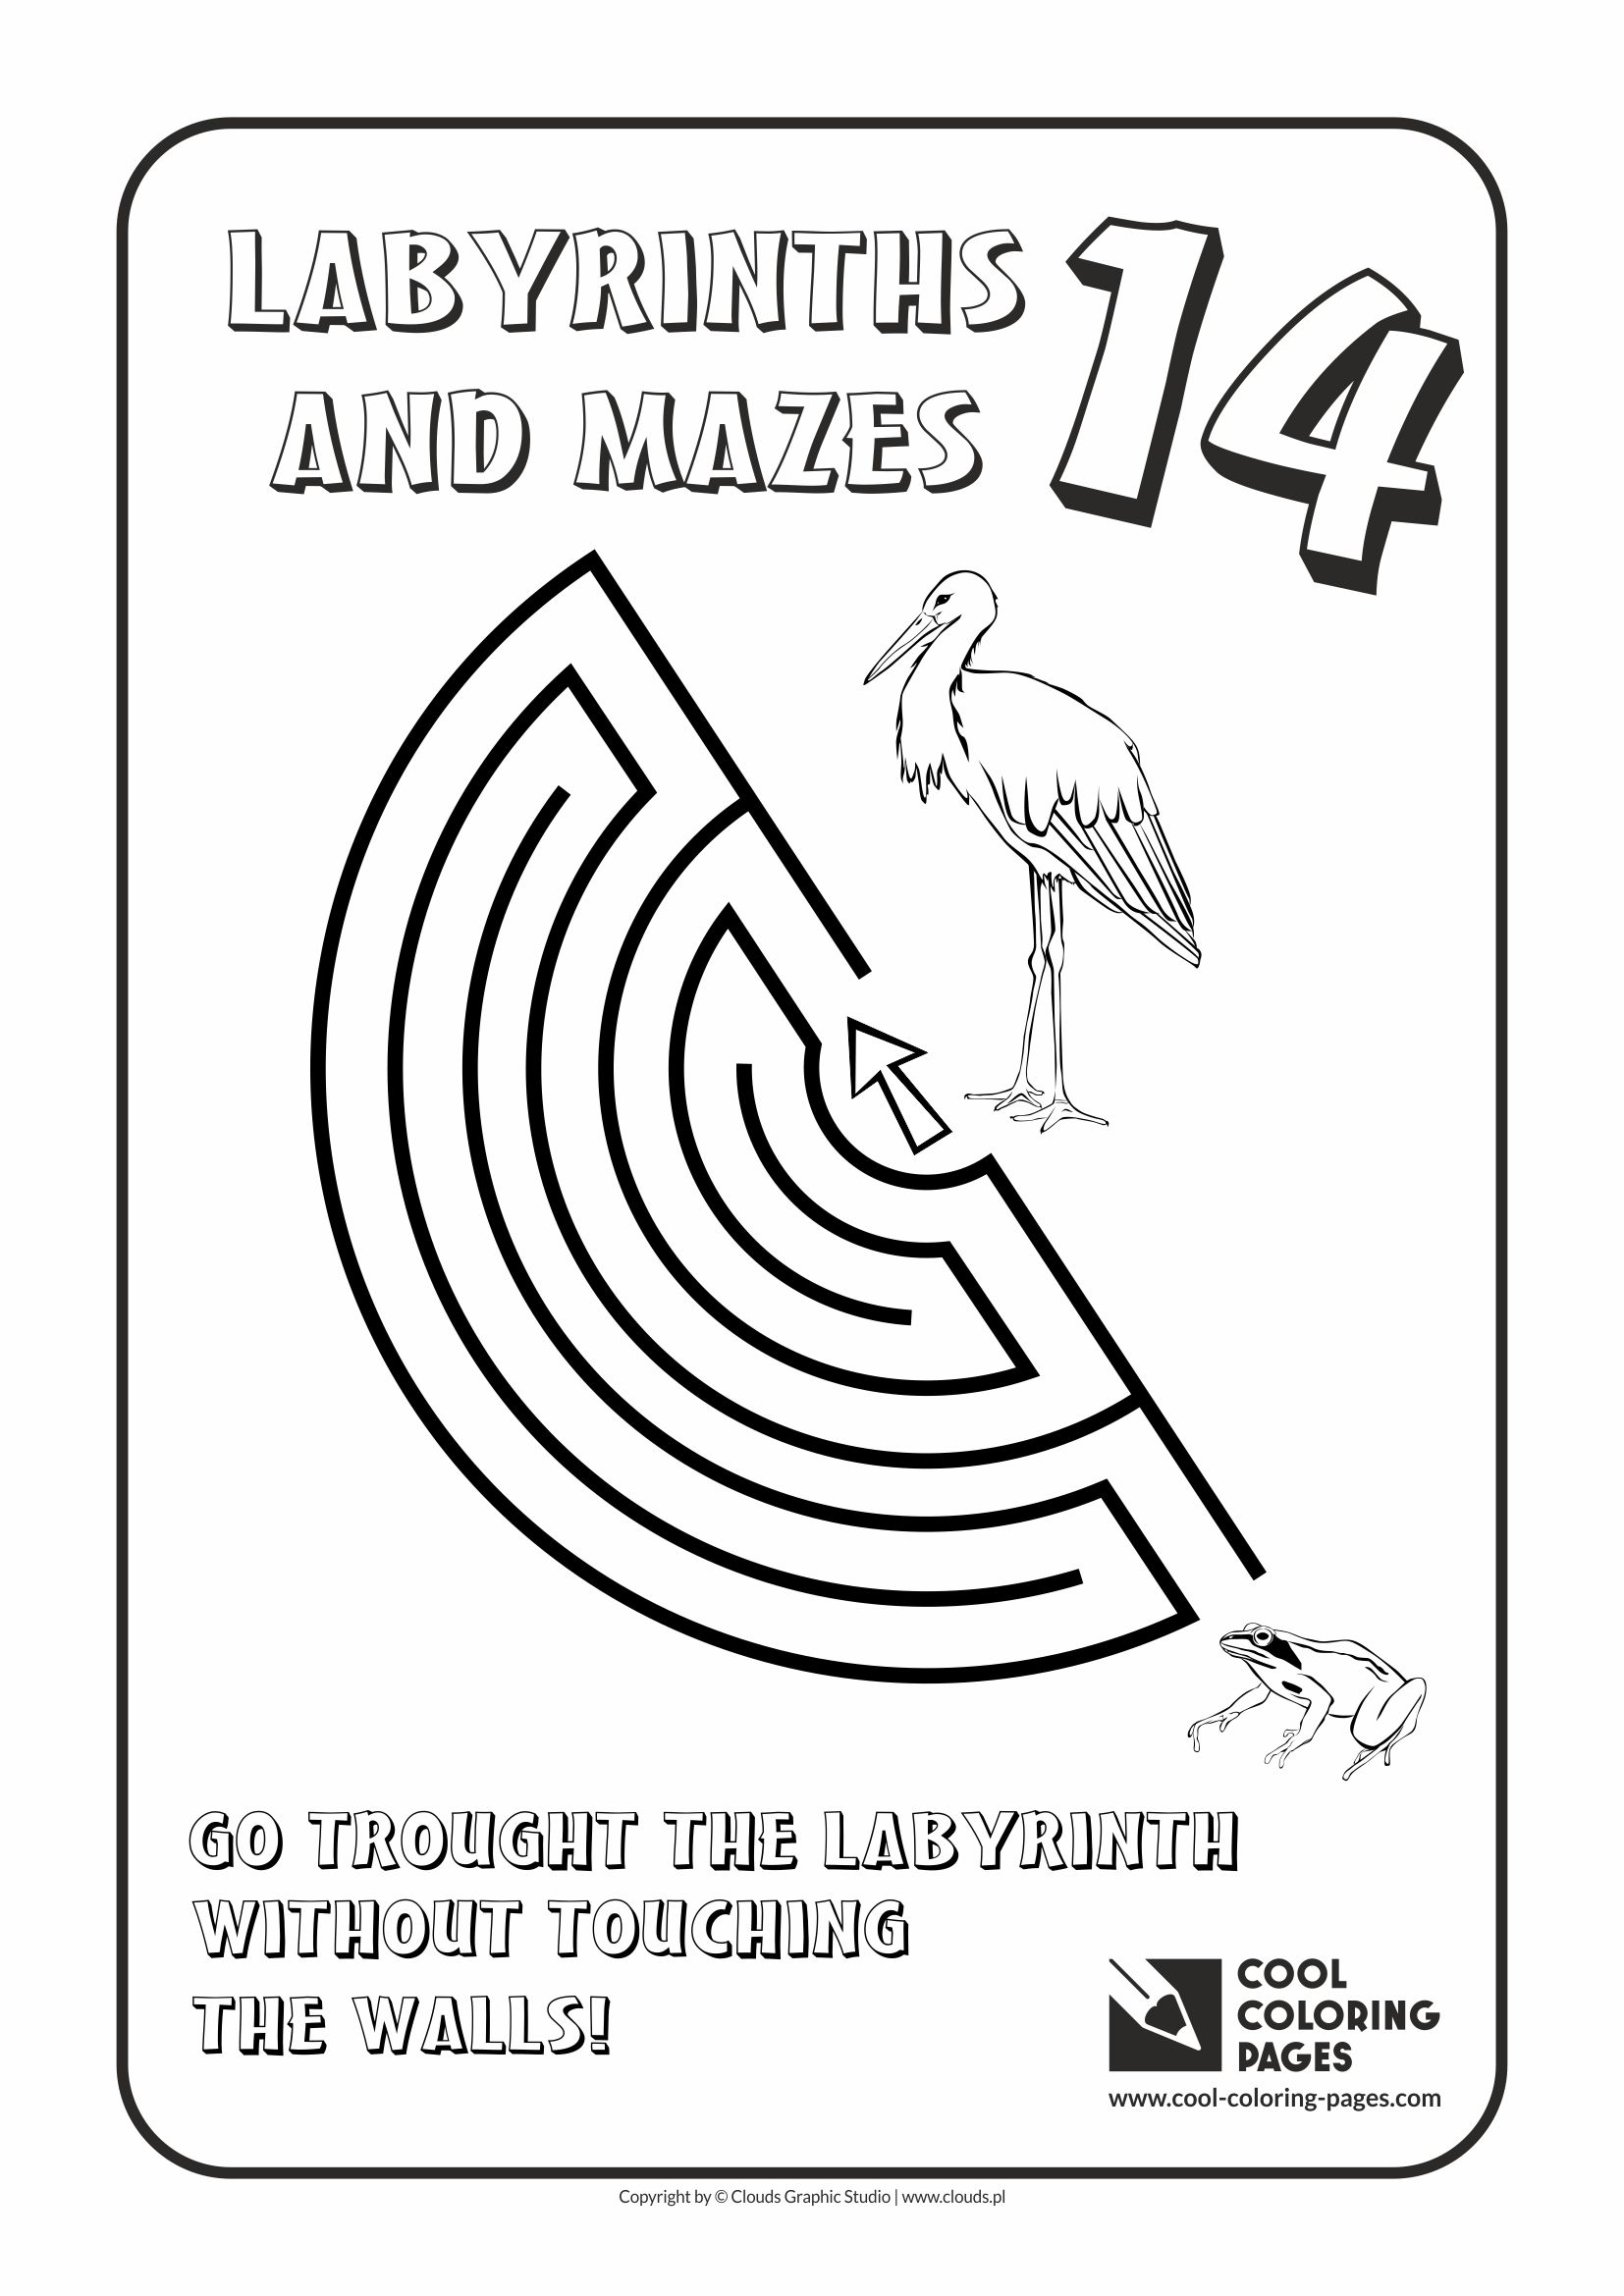 Cool Coloring Pages - Labyrinths and mazes / Maze no 14